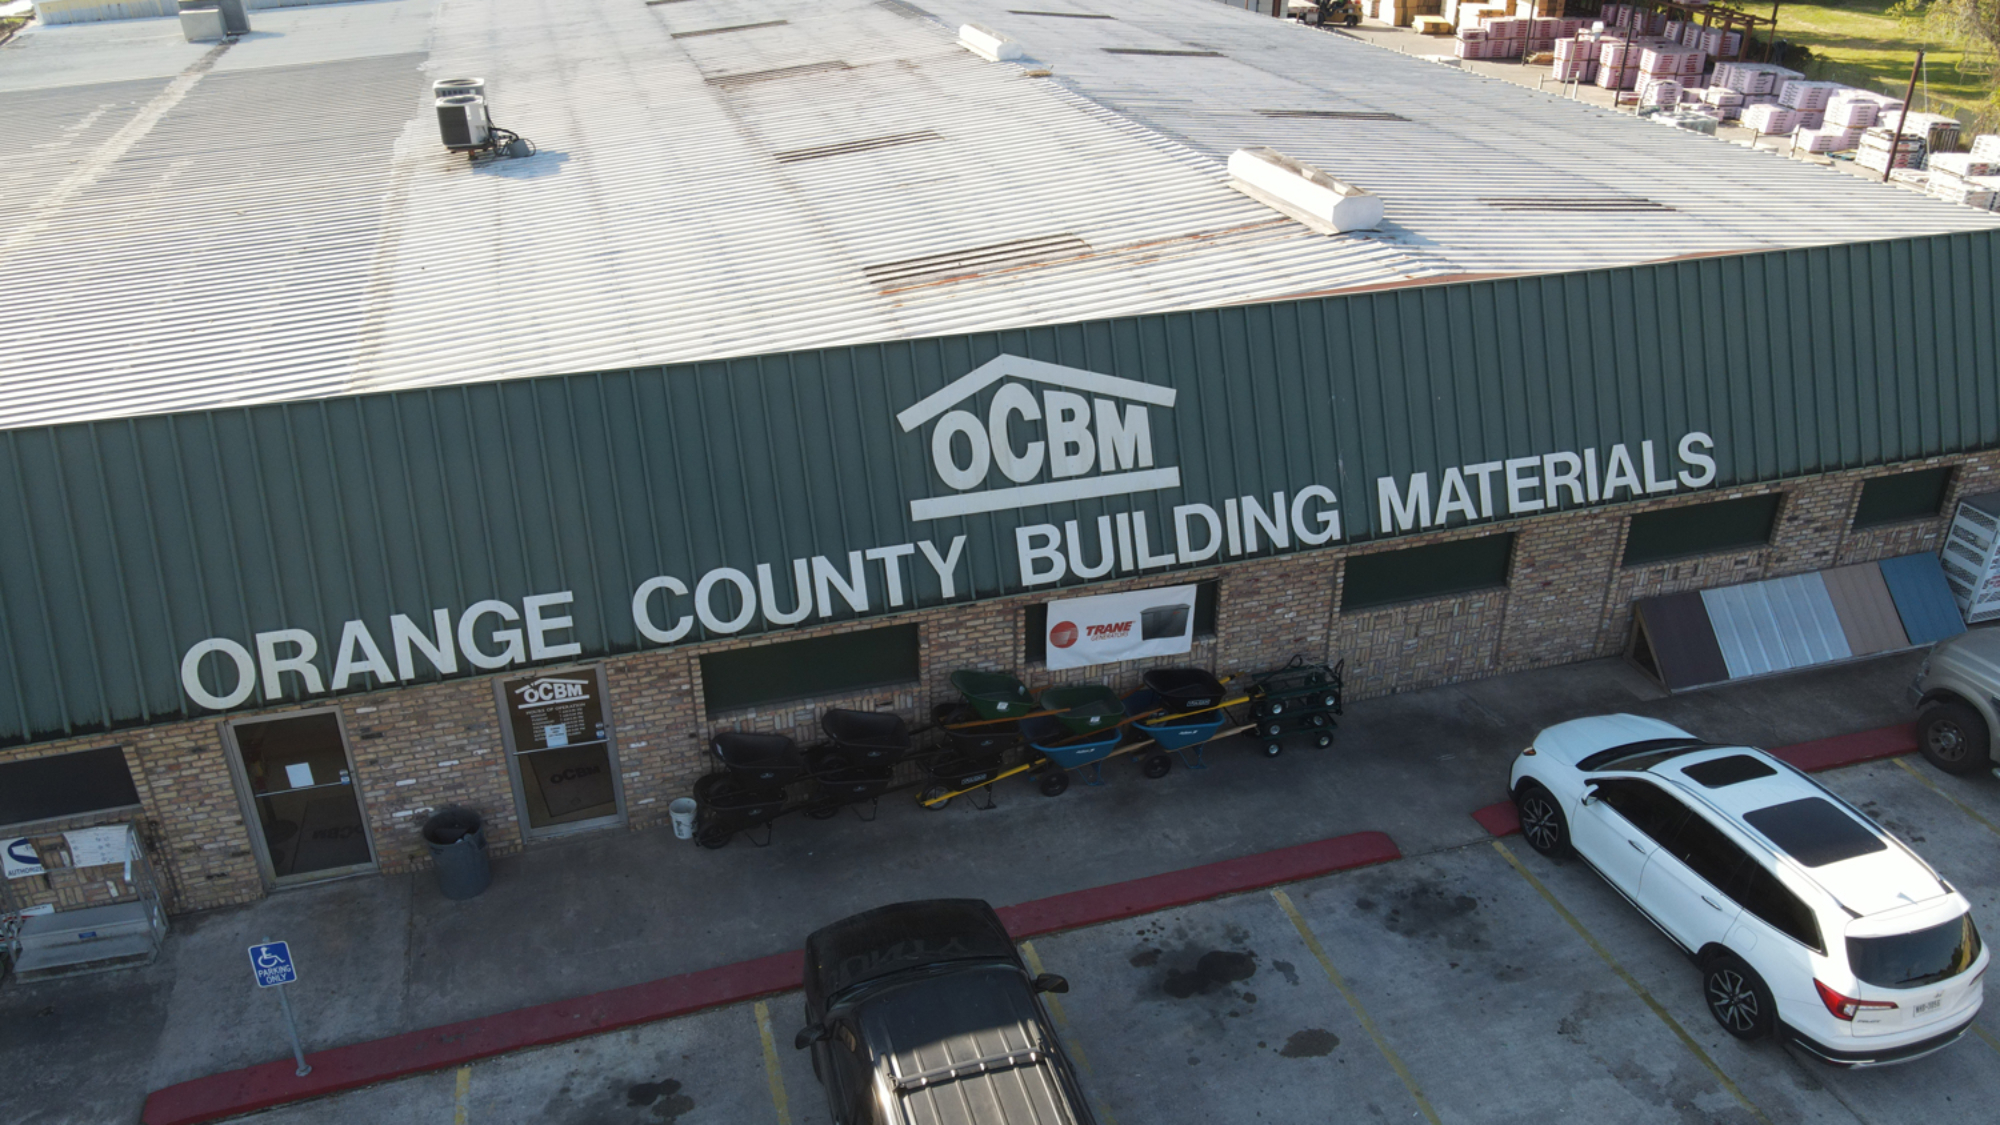 Read our comprehensive review of Orange County Building Materials in Vidor, TX. Learn about their commitment to quality, exceptional service, and extensive range of construction materials and building supplies.